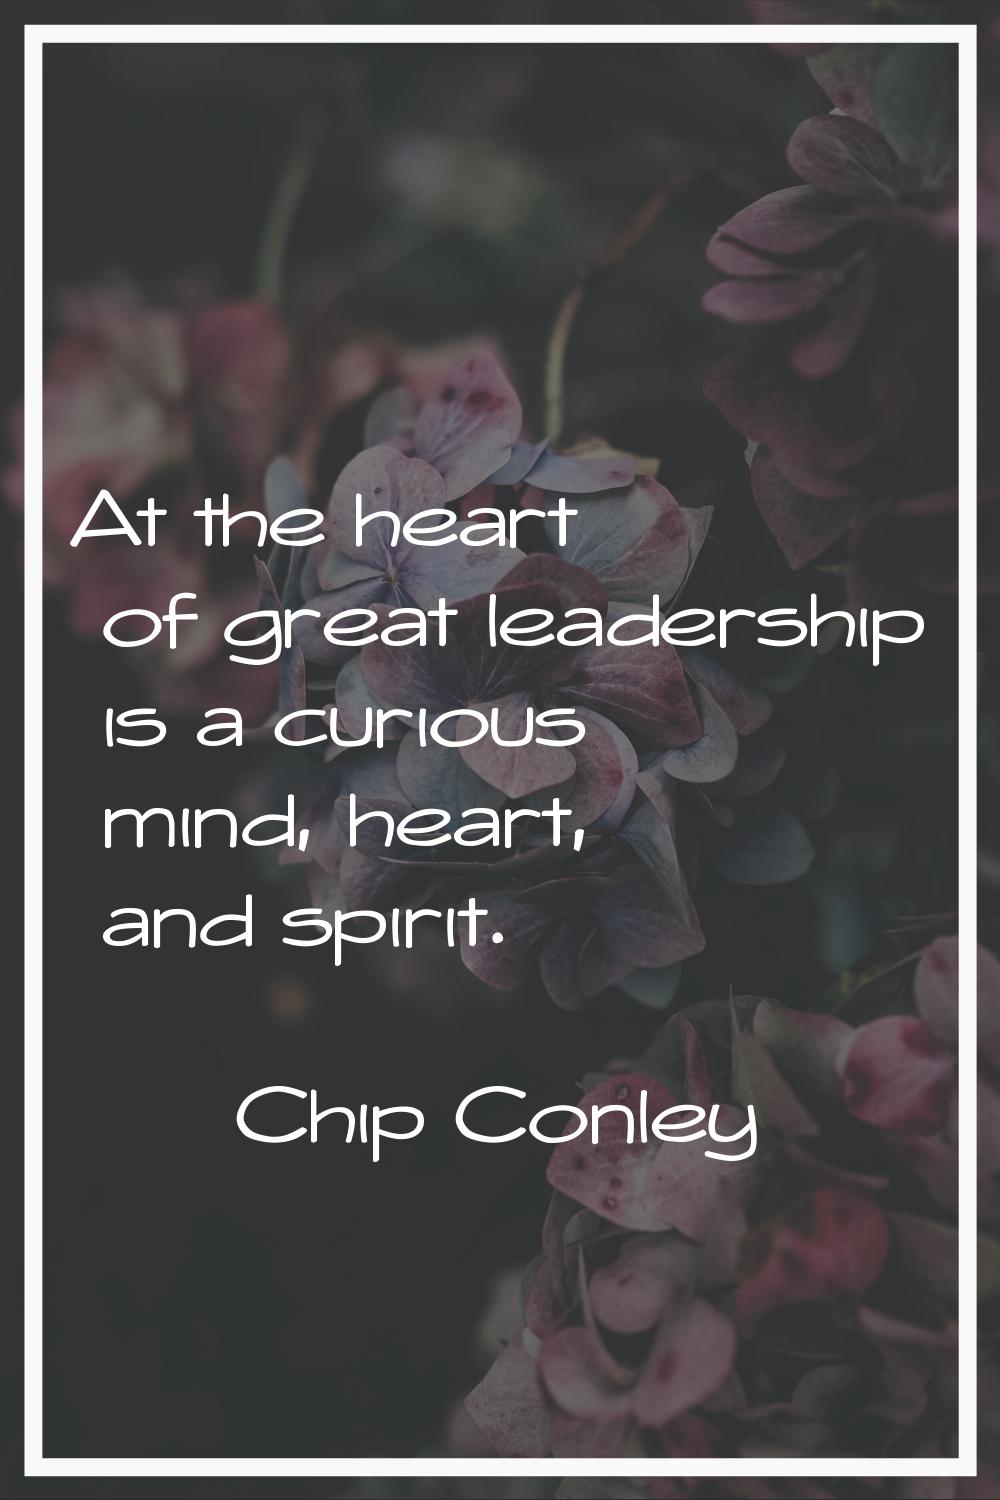 At the heart of great leadership is a curious mind, heart, and spirit.